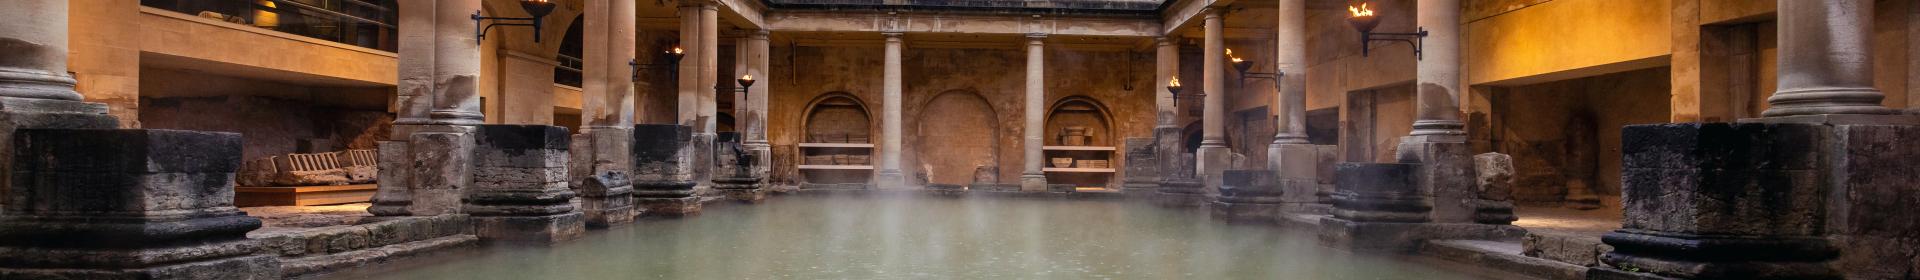 Image: View of the Great Bath, Rebecca Faith Photography